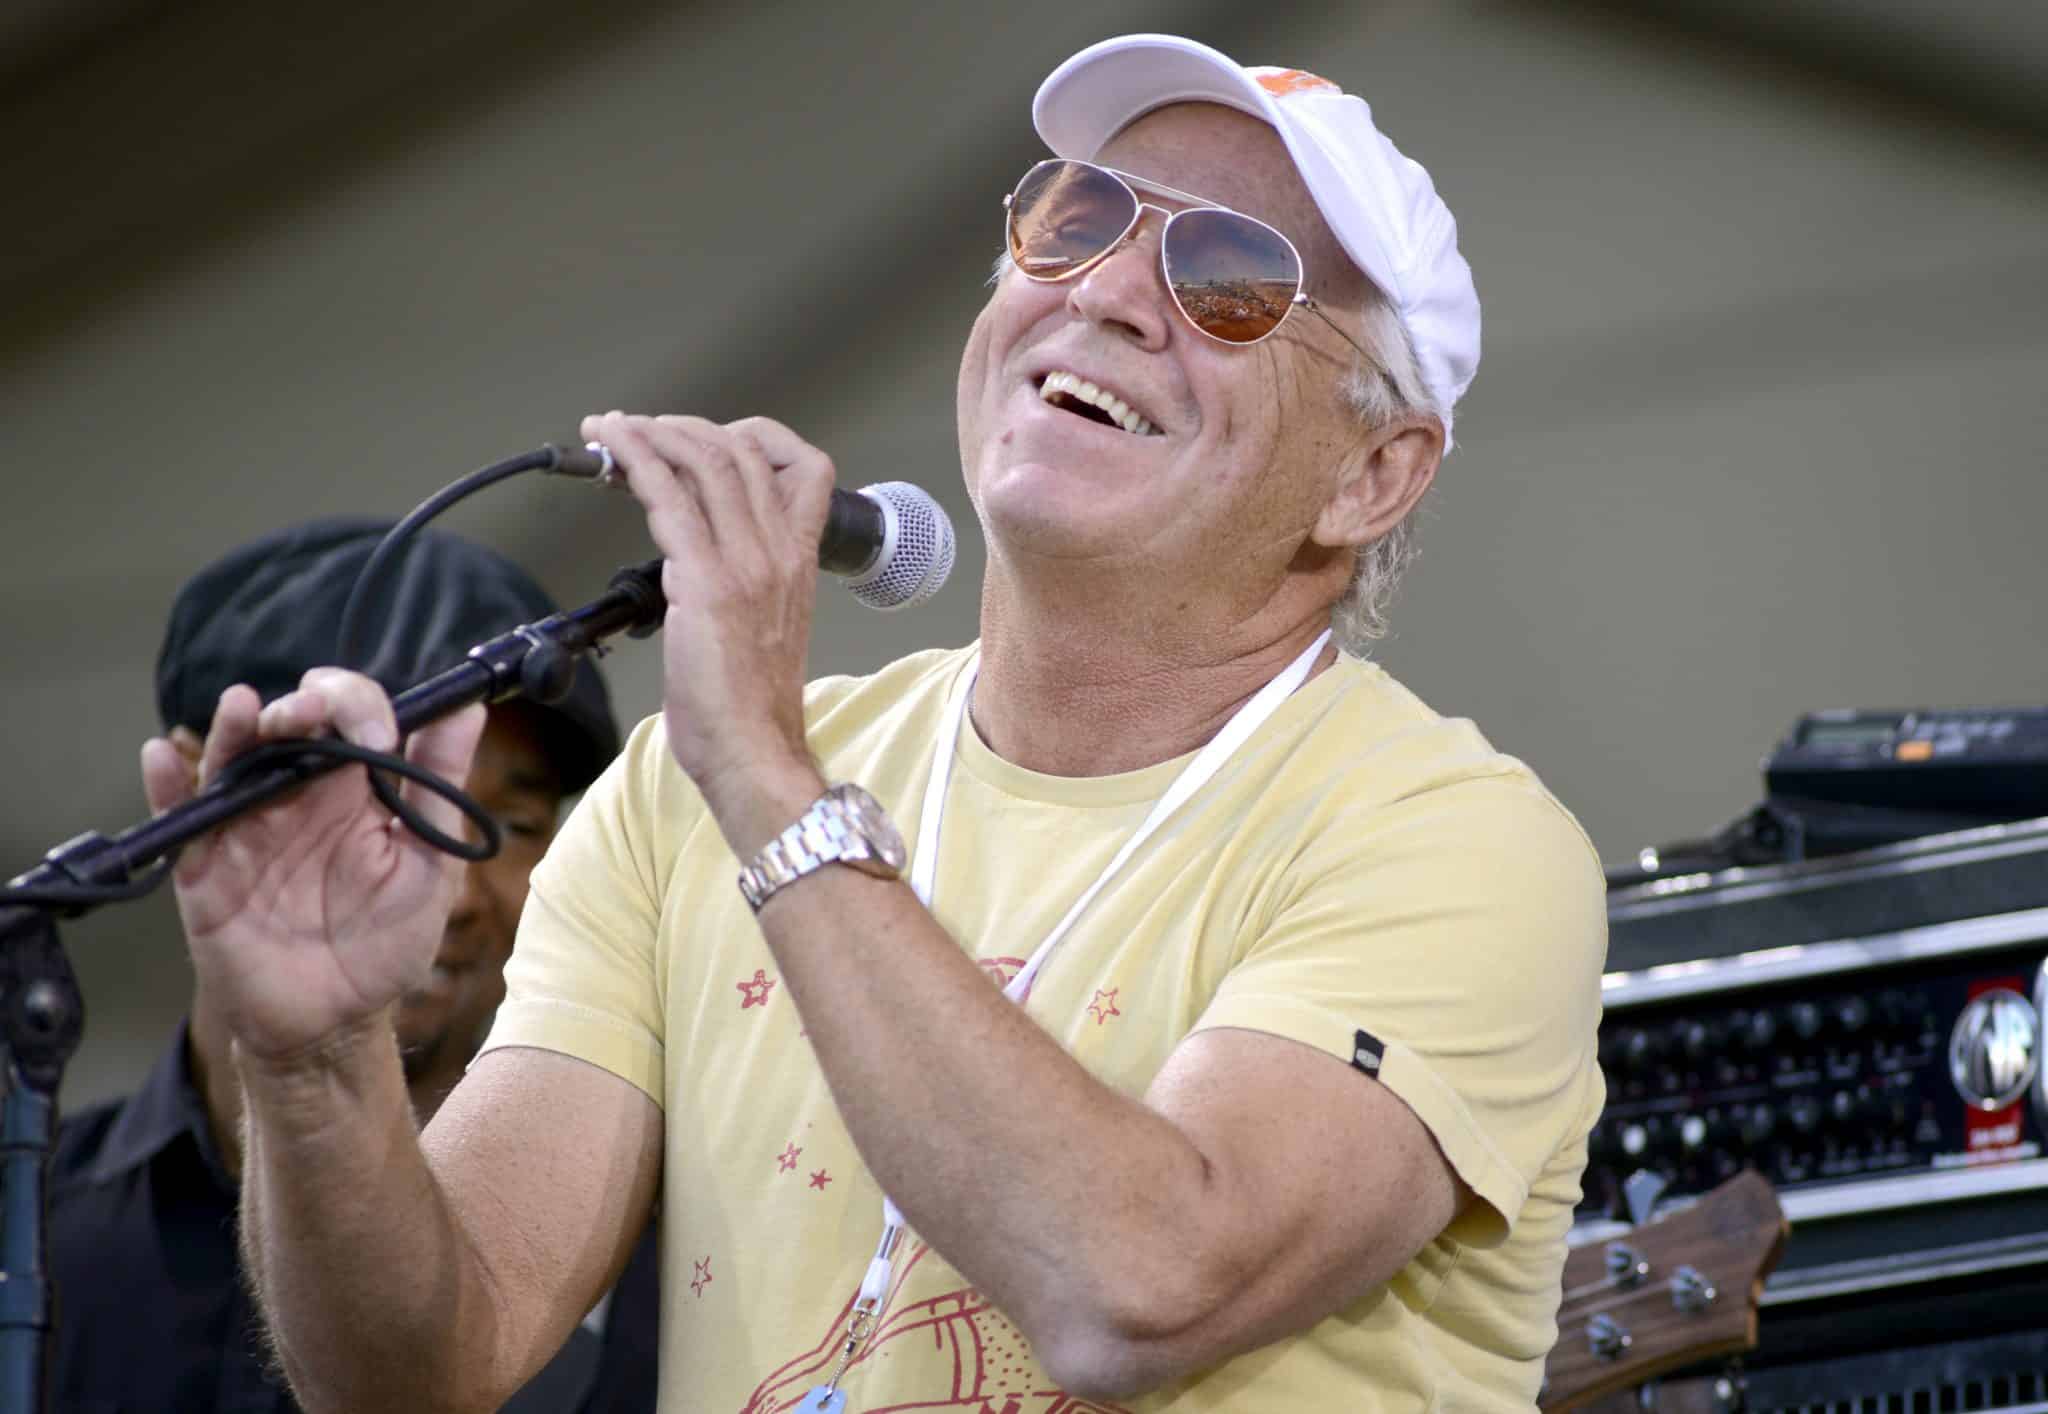 The state of Florida established "Jimmy Buffett Day" to honor the late singer in August 2024. This photo shows Jimmy performing in New Orleans in 2014.